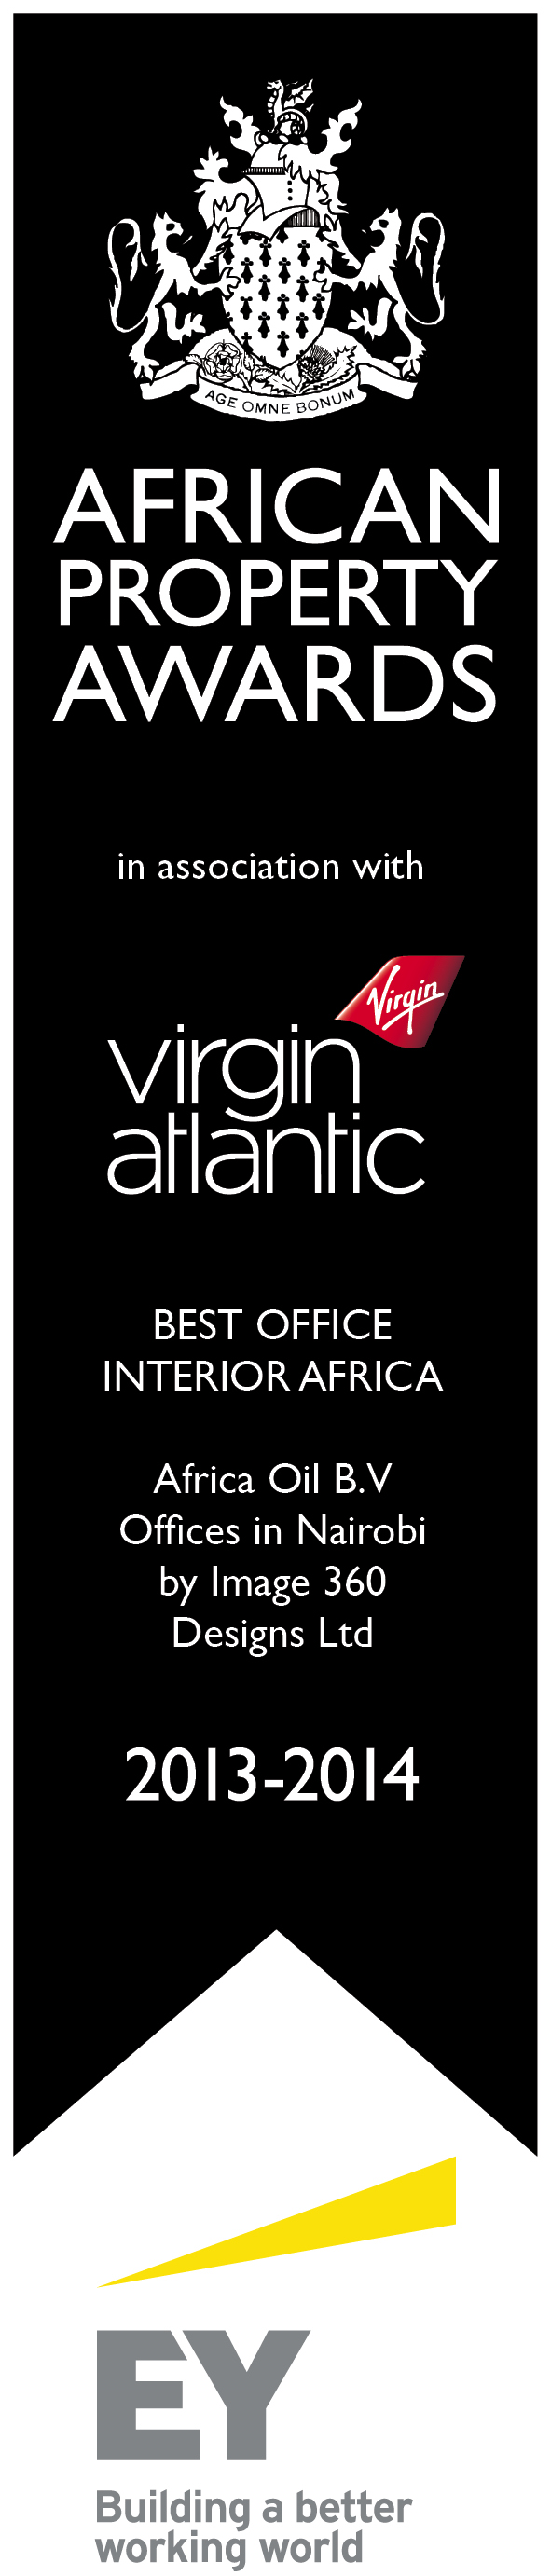 African Property Award (2013-2014) for Best Office Interior Africa